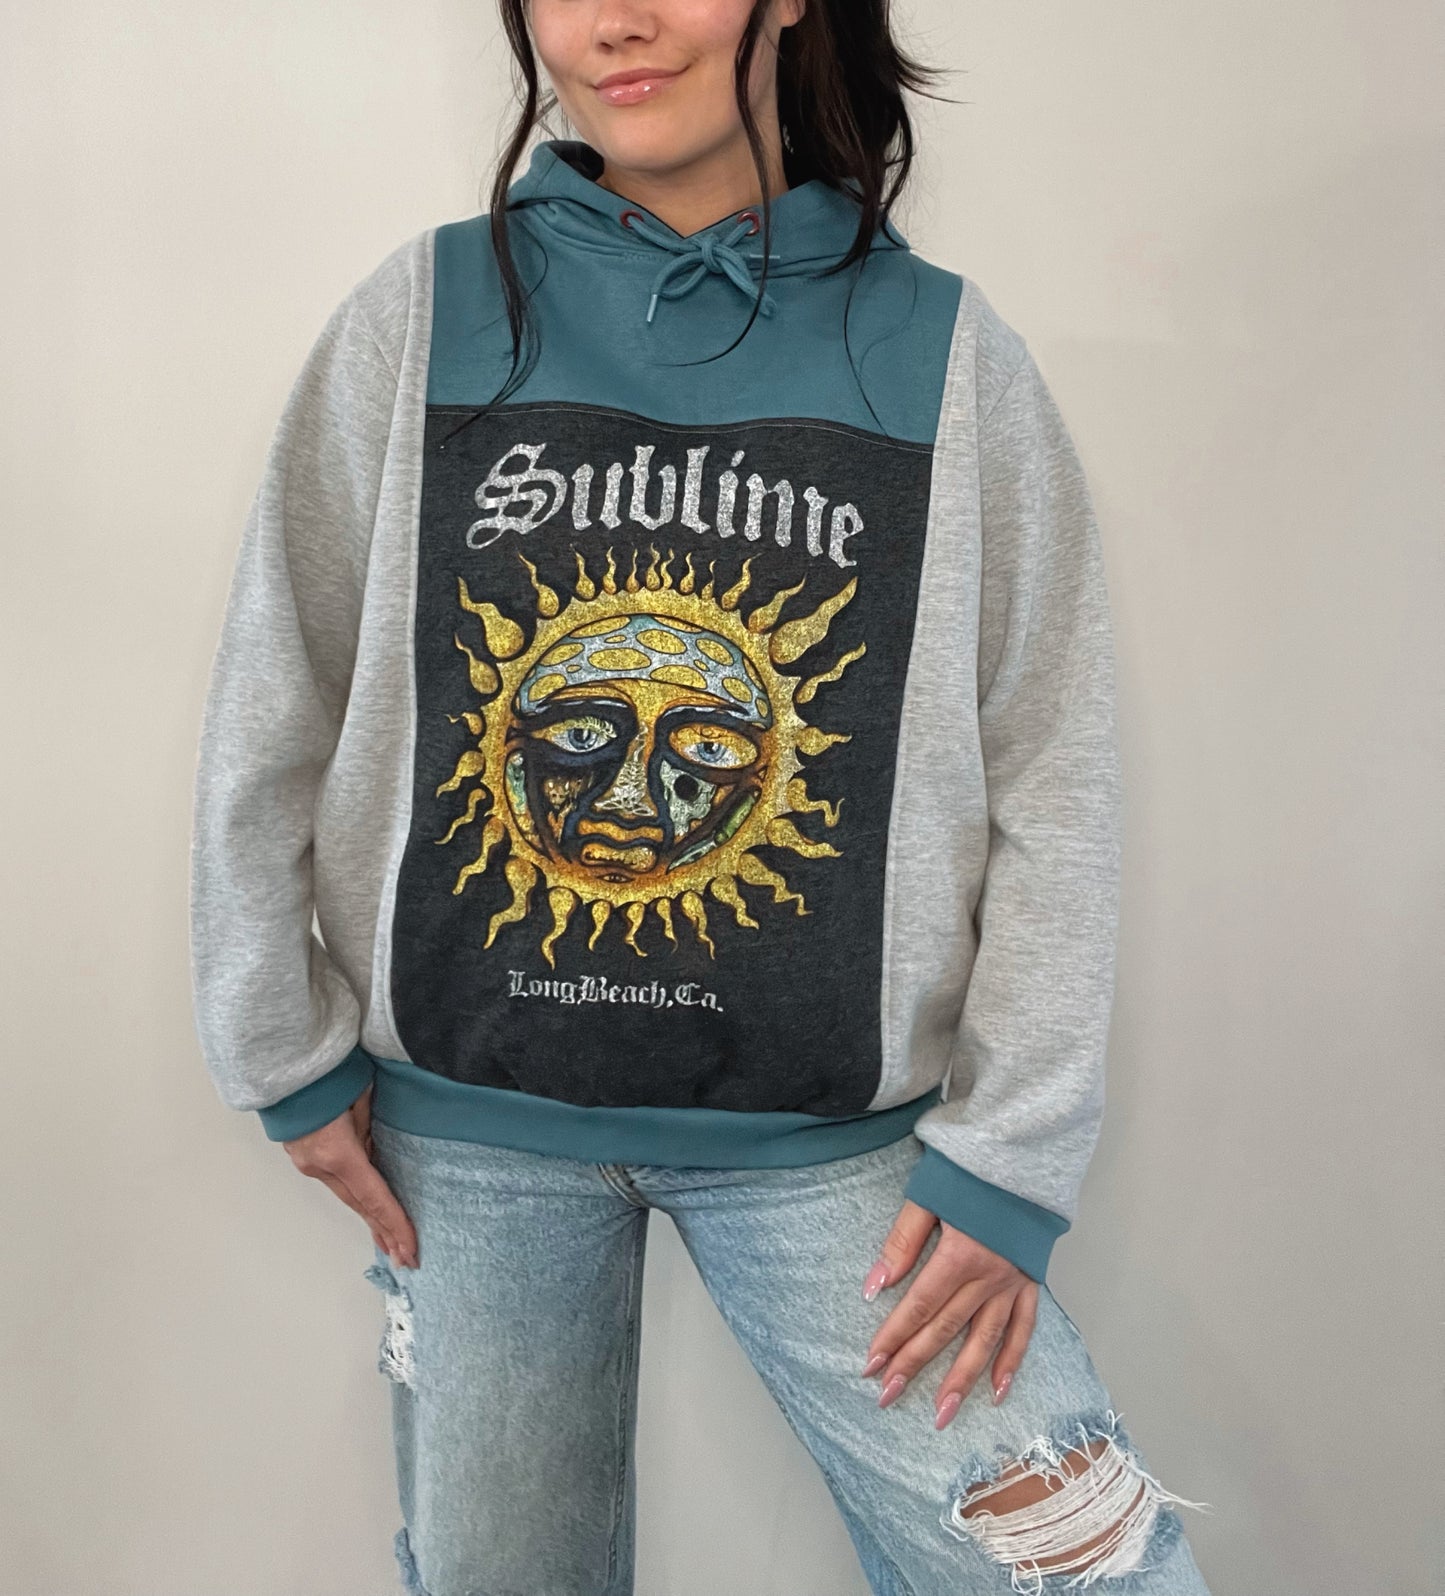 sublime band hoodie